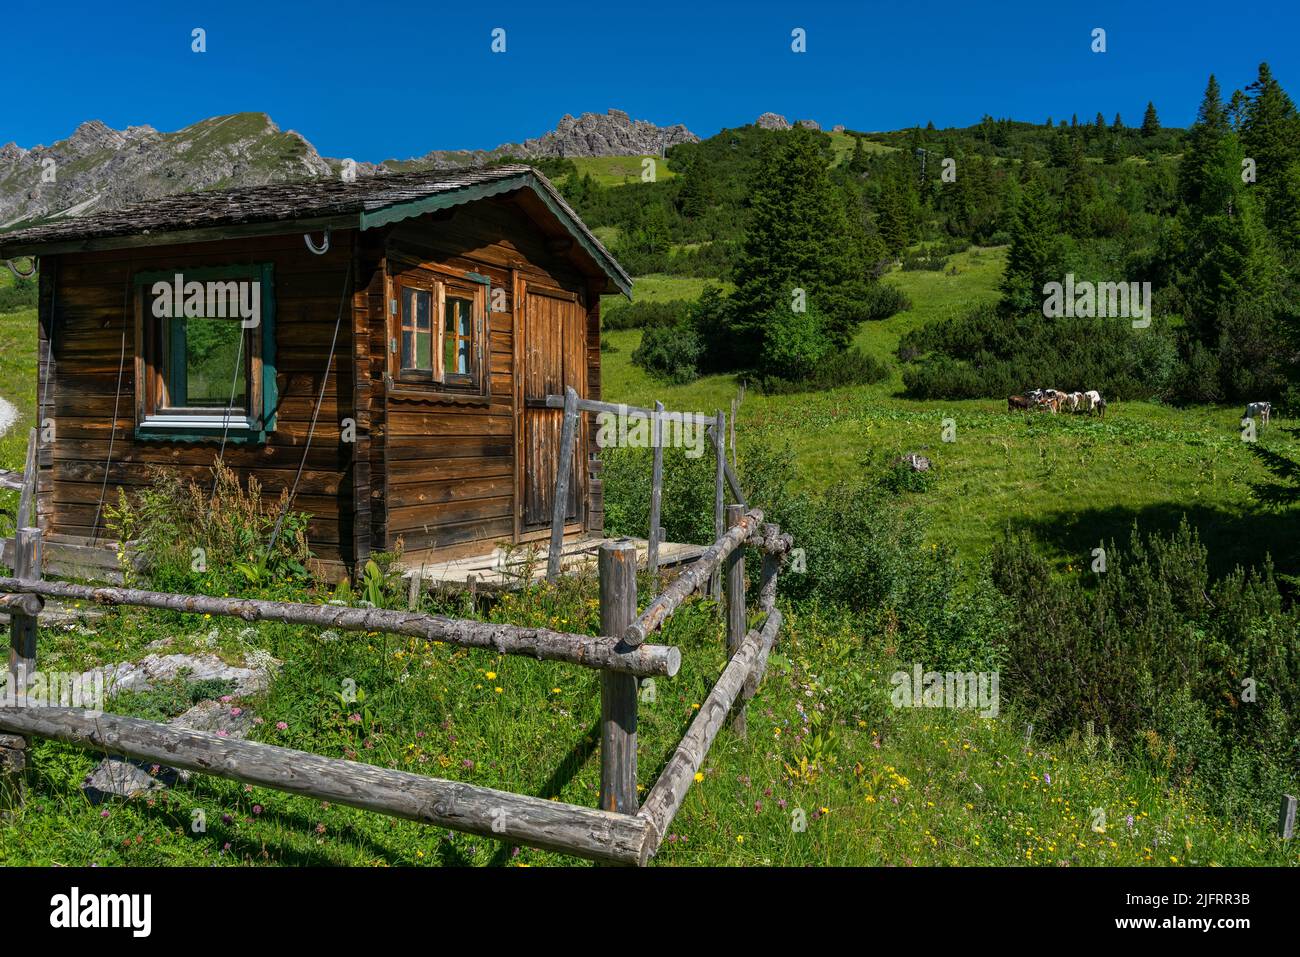 little wooden hut on alpine meadow. On a flower-strewn hill stands a cabin in the Brand valley mountains. By the dirty road stand a alpine barn Stock Photo